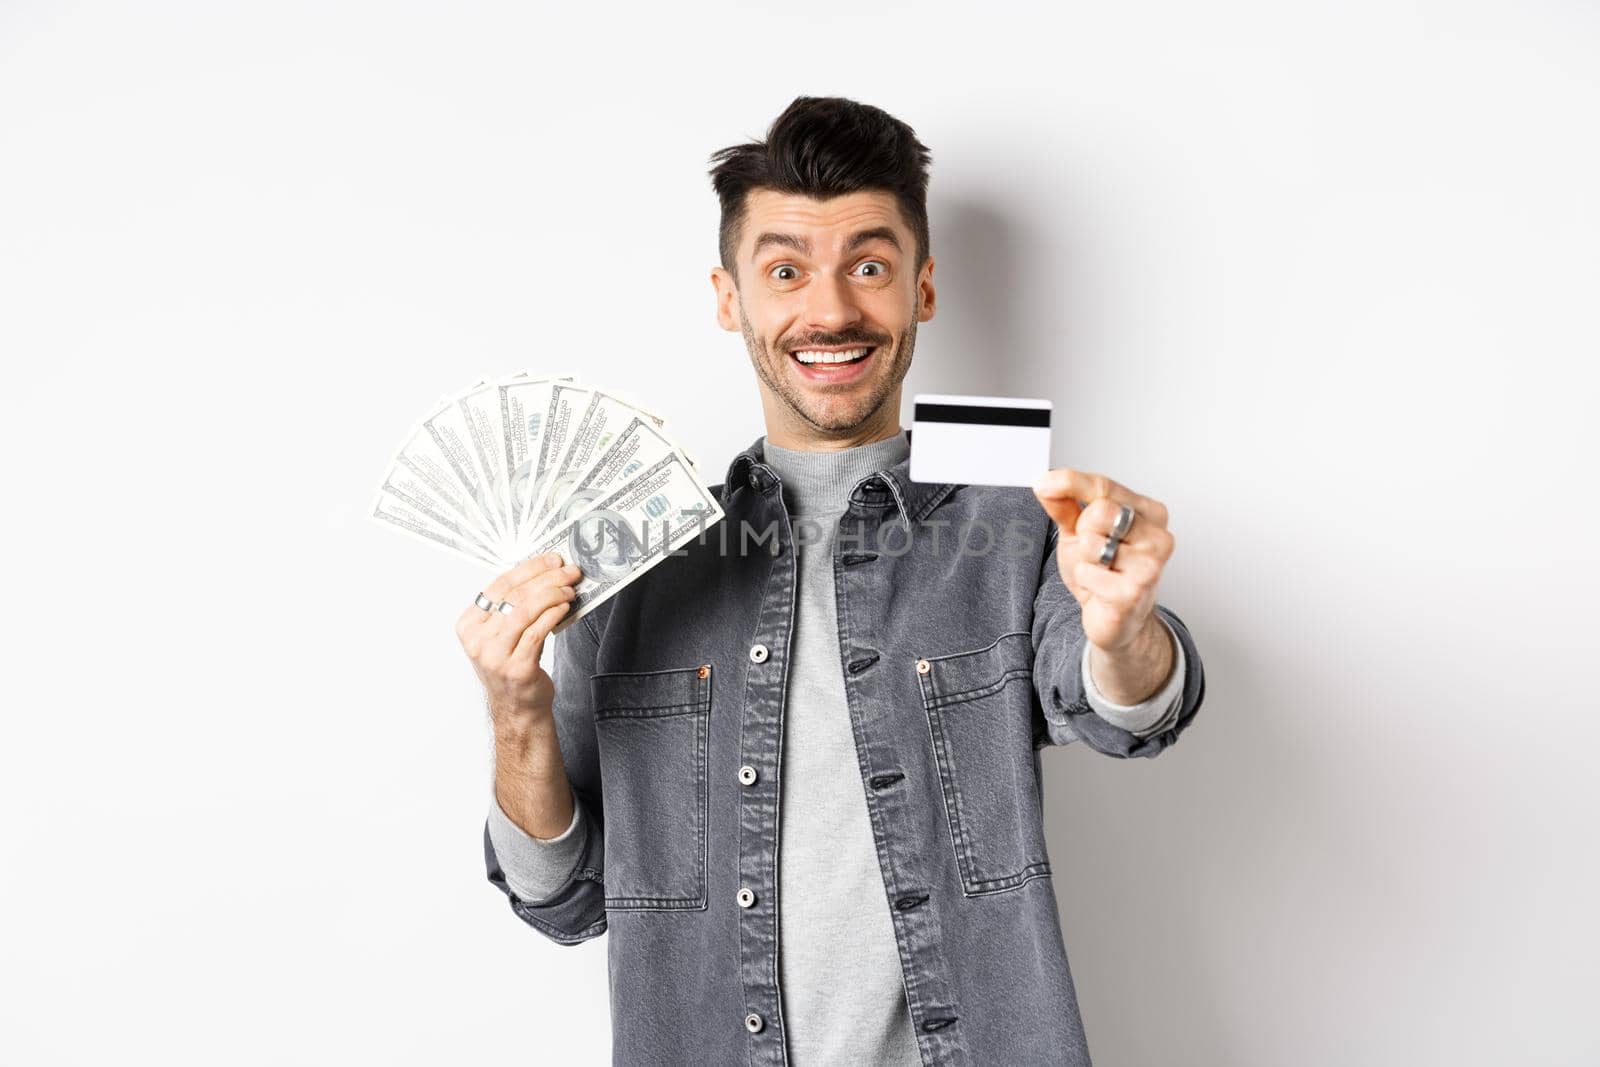 Image of handsome guy holding dollar bills but suggesting use plastic credit card, smiling friendly at camera, standing on white background.